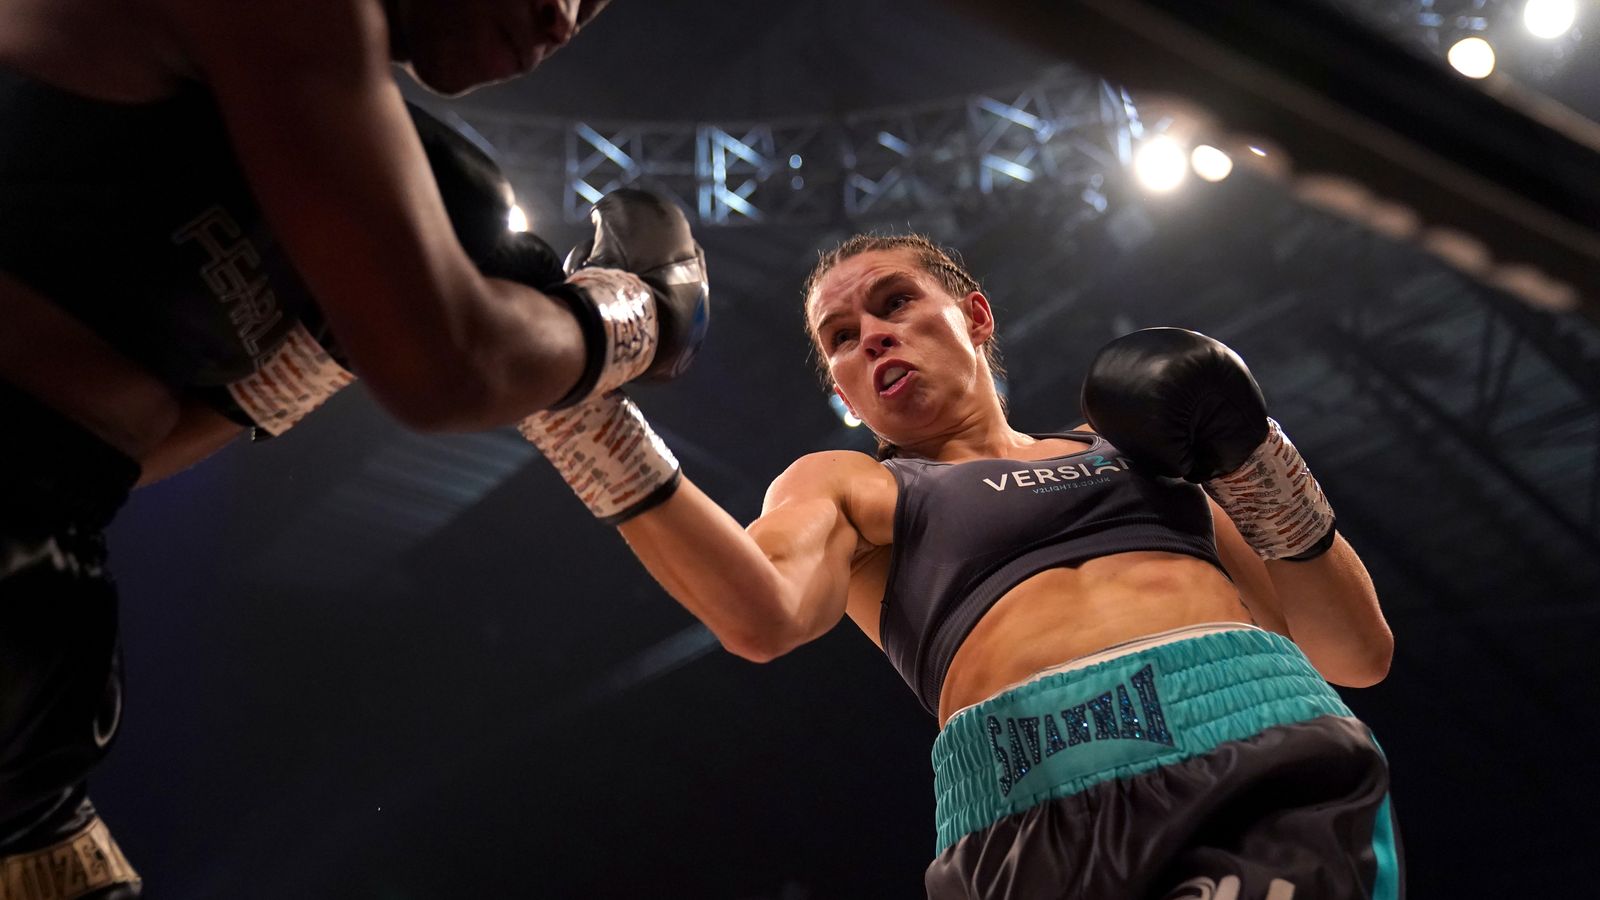 Savannah Marshall warns Claressa Shields: I’m different. I’ll take a punch to knock you out’